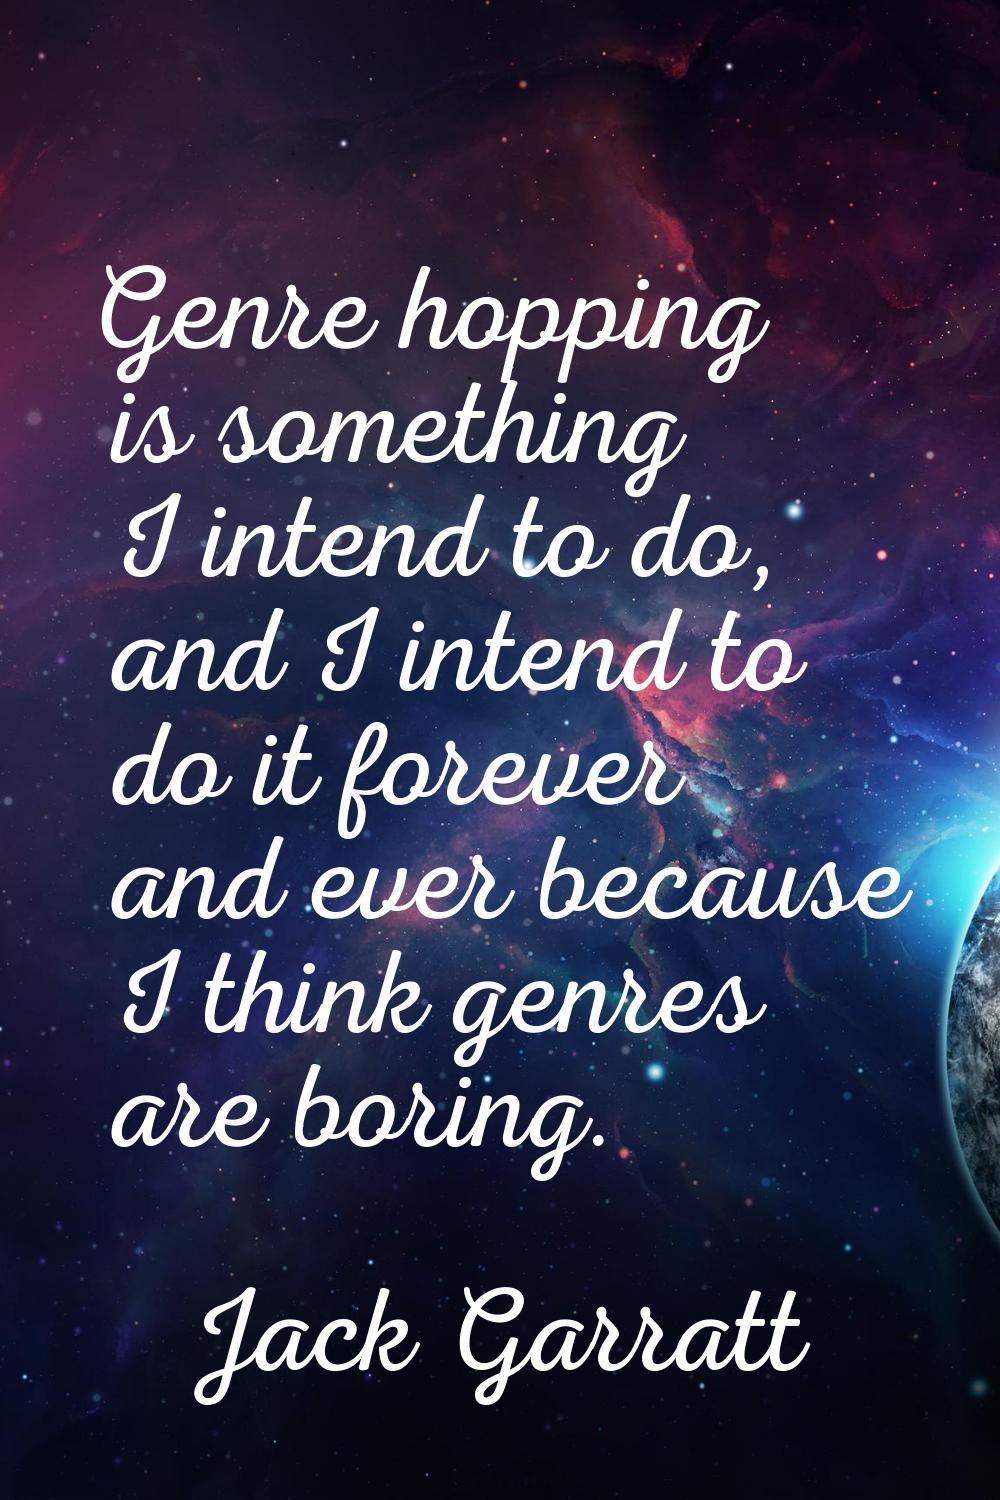 Genre hopping is something I intend to do, and I intend to do it forever and ever because I think g